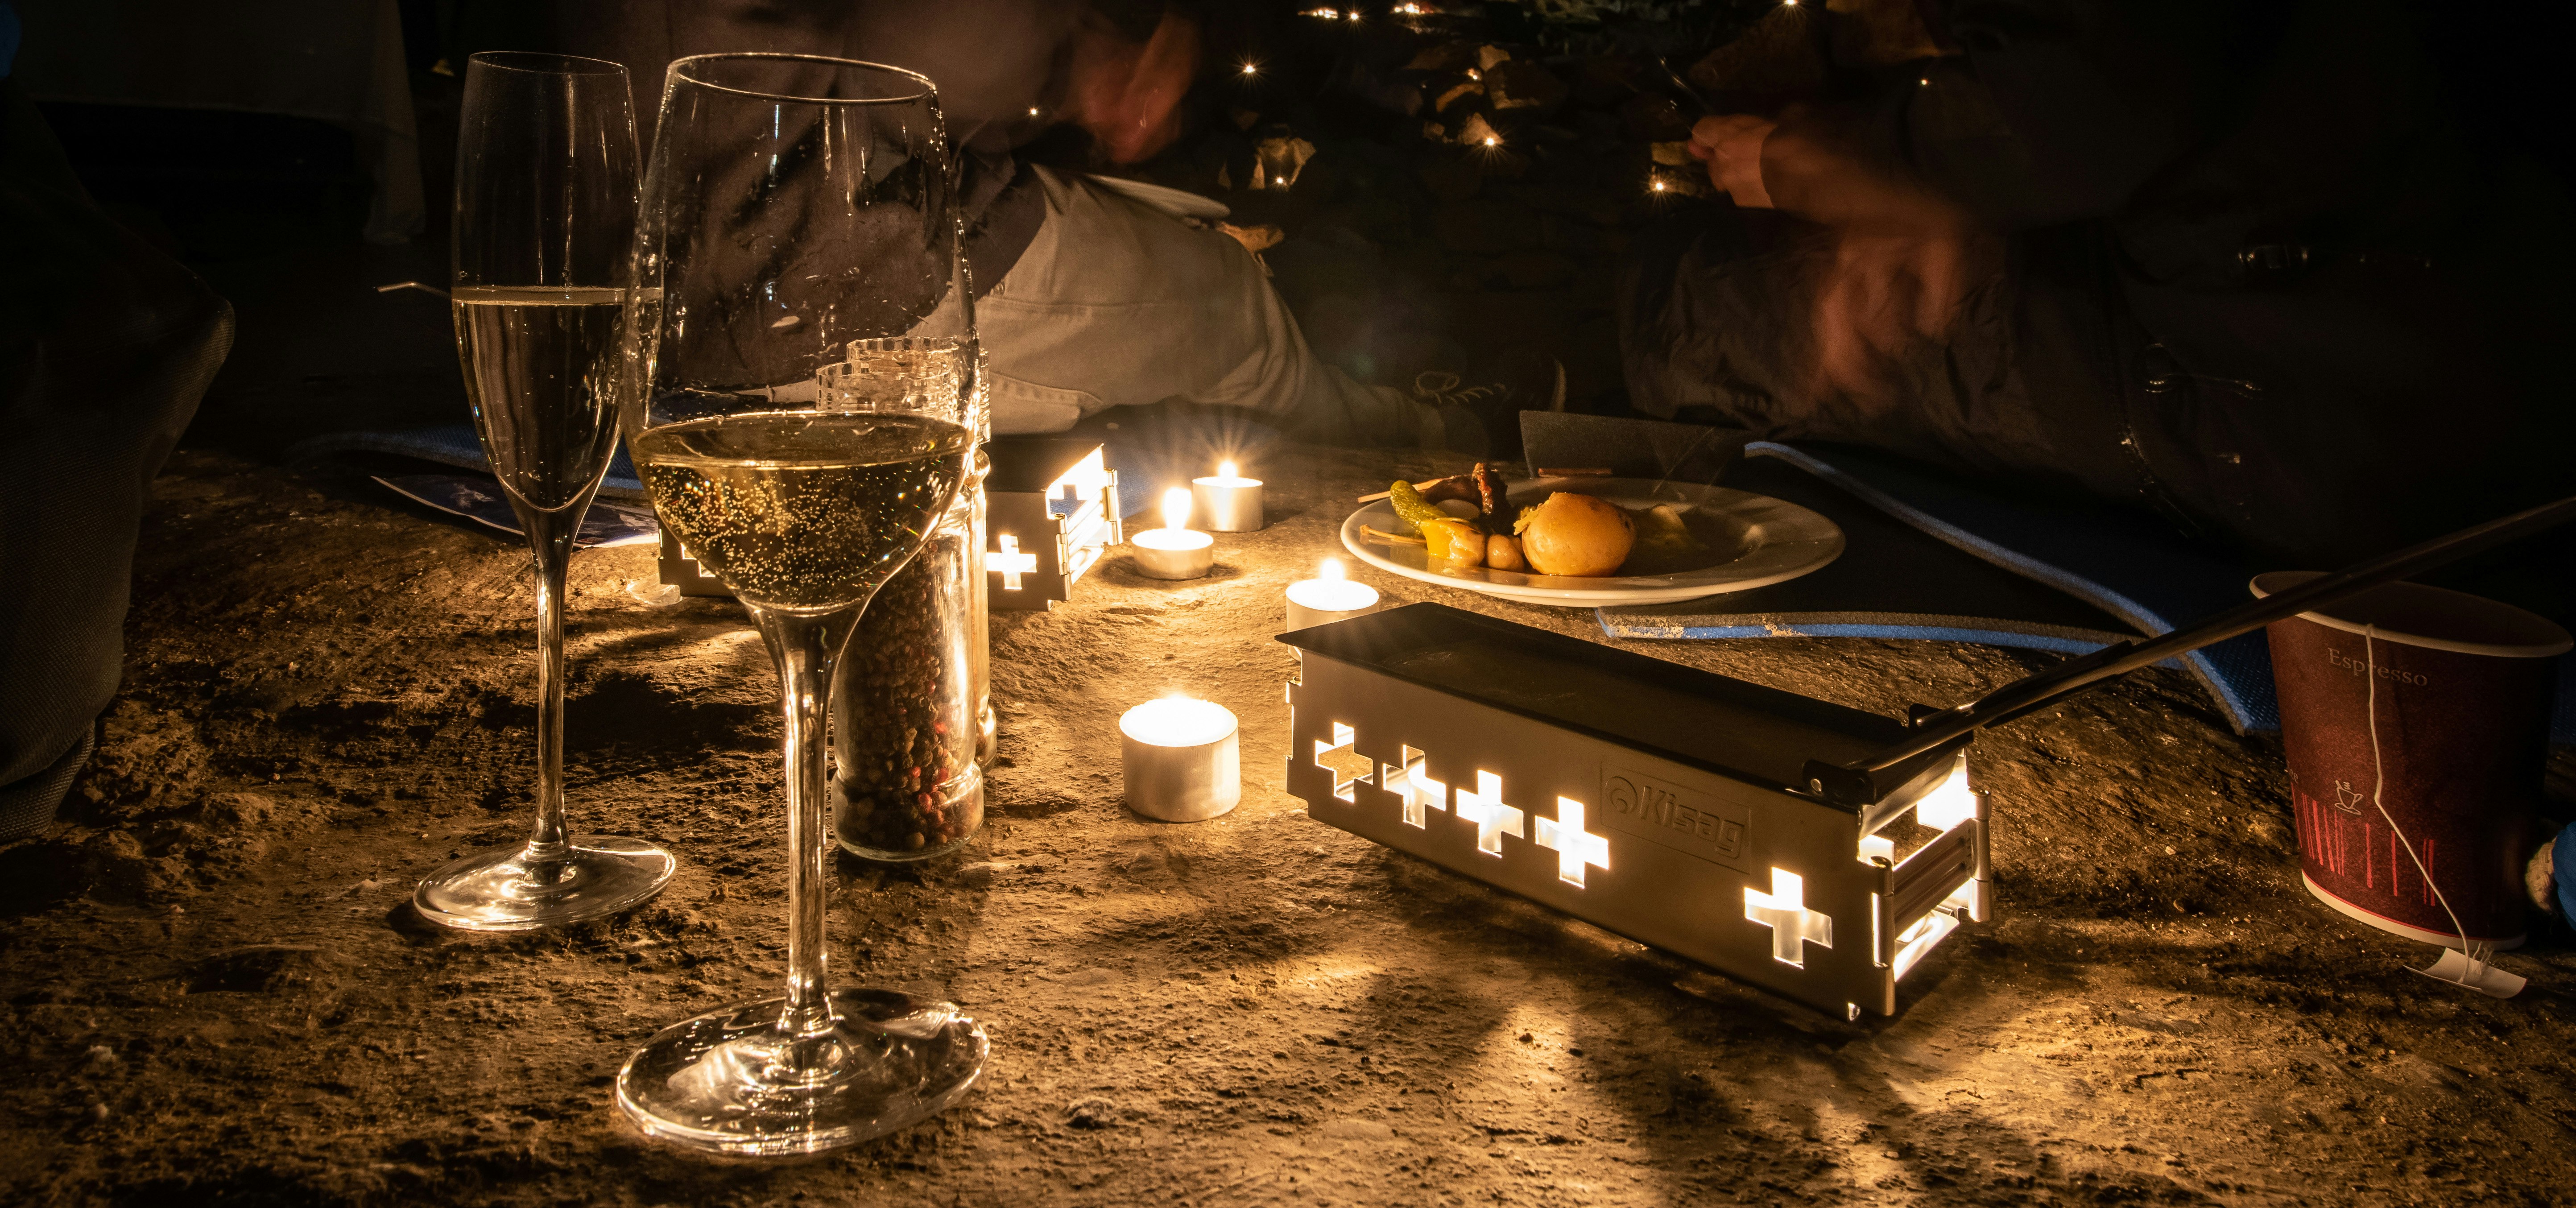 Exclusive candlelight raclette grotto in the Beatus Caves